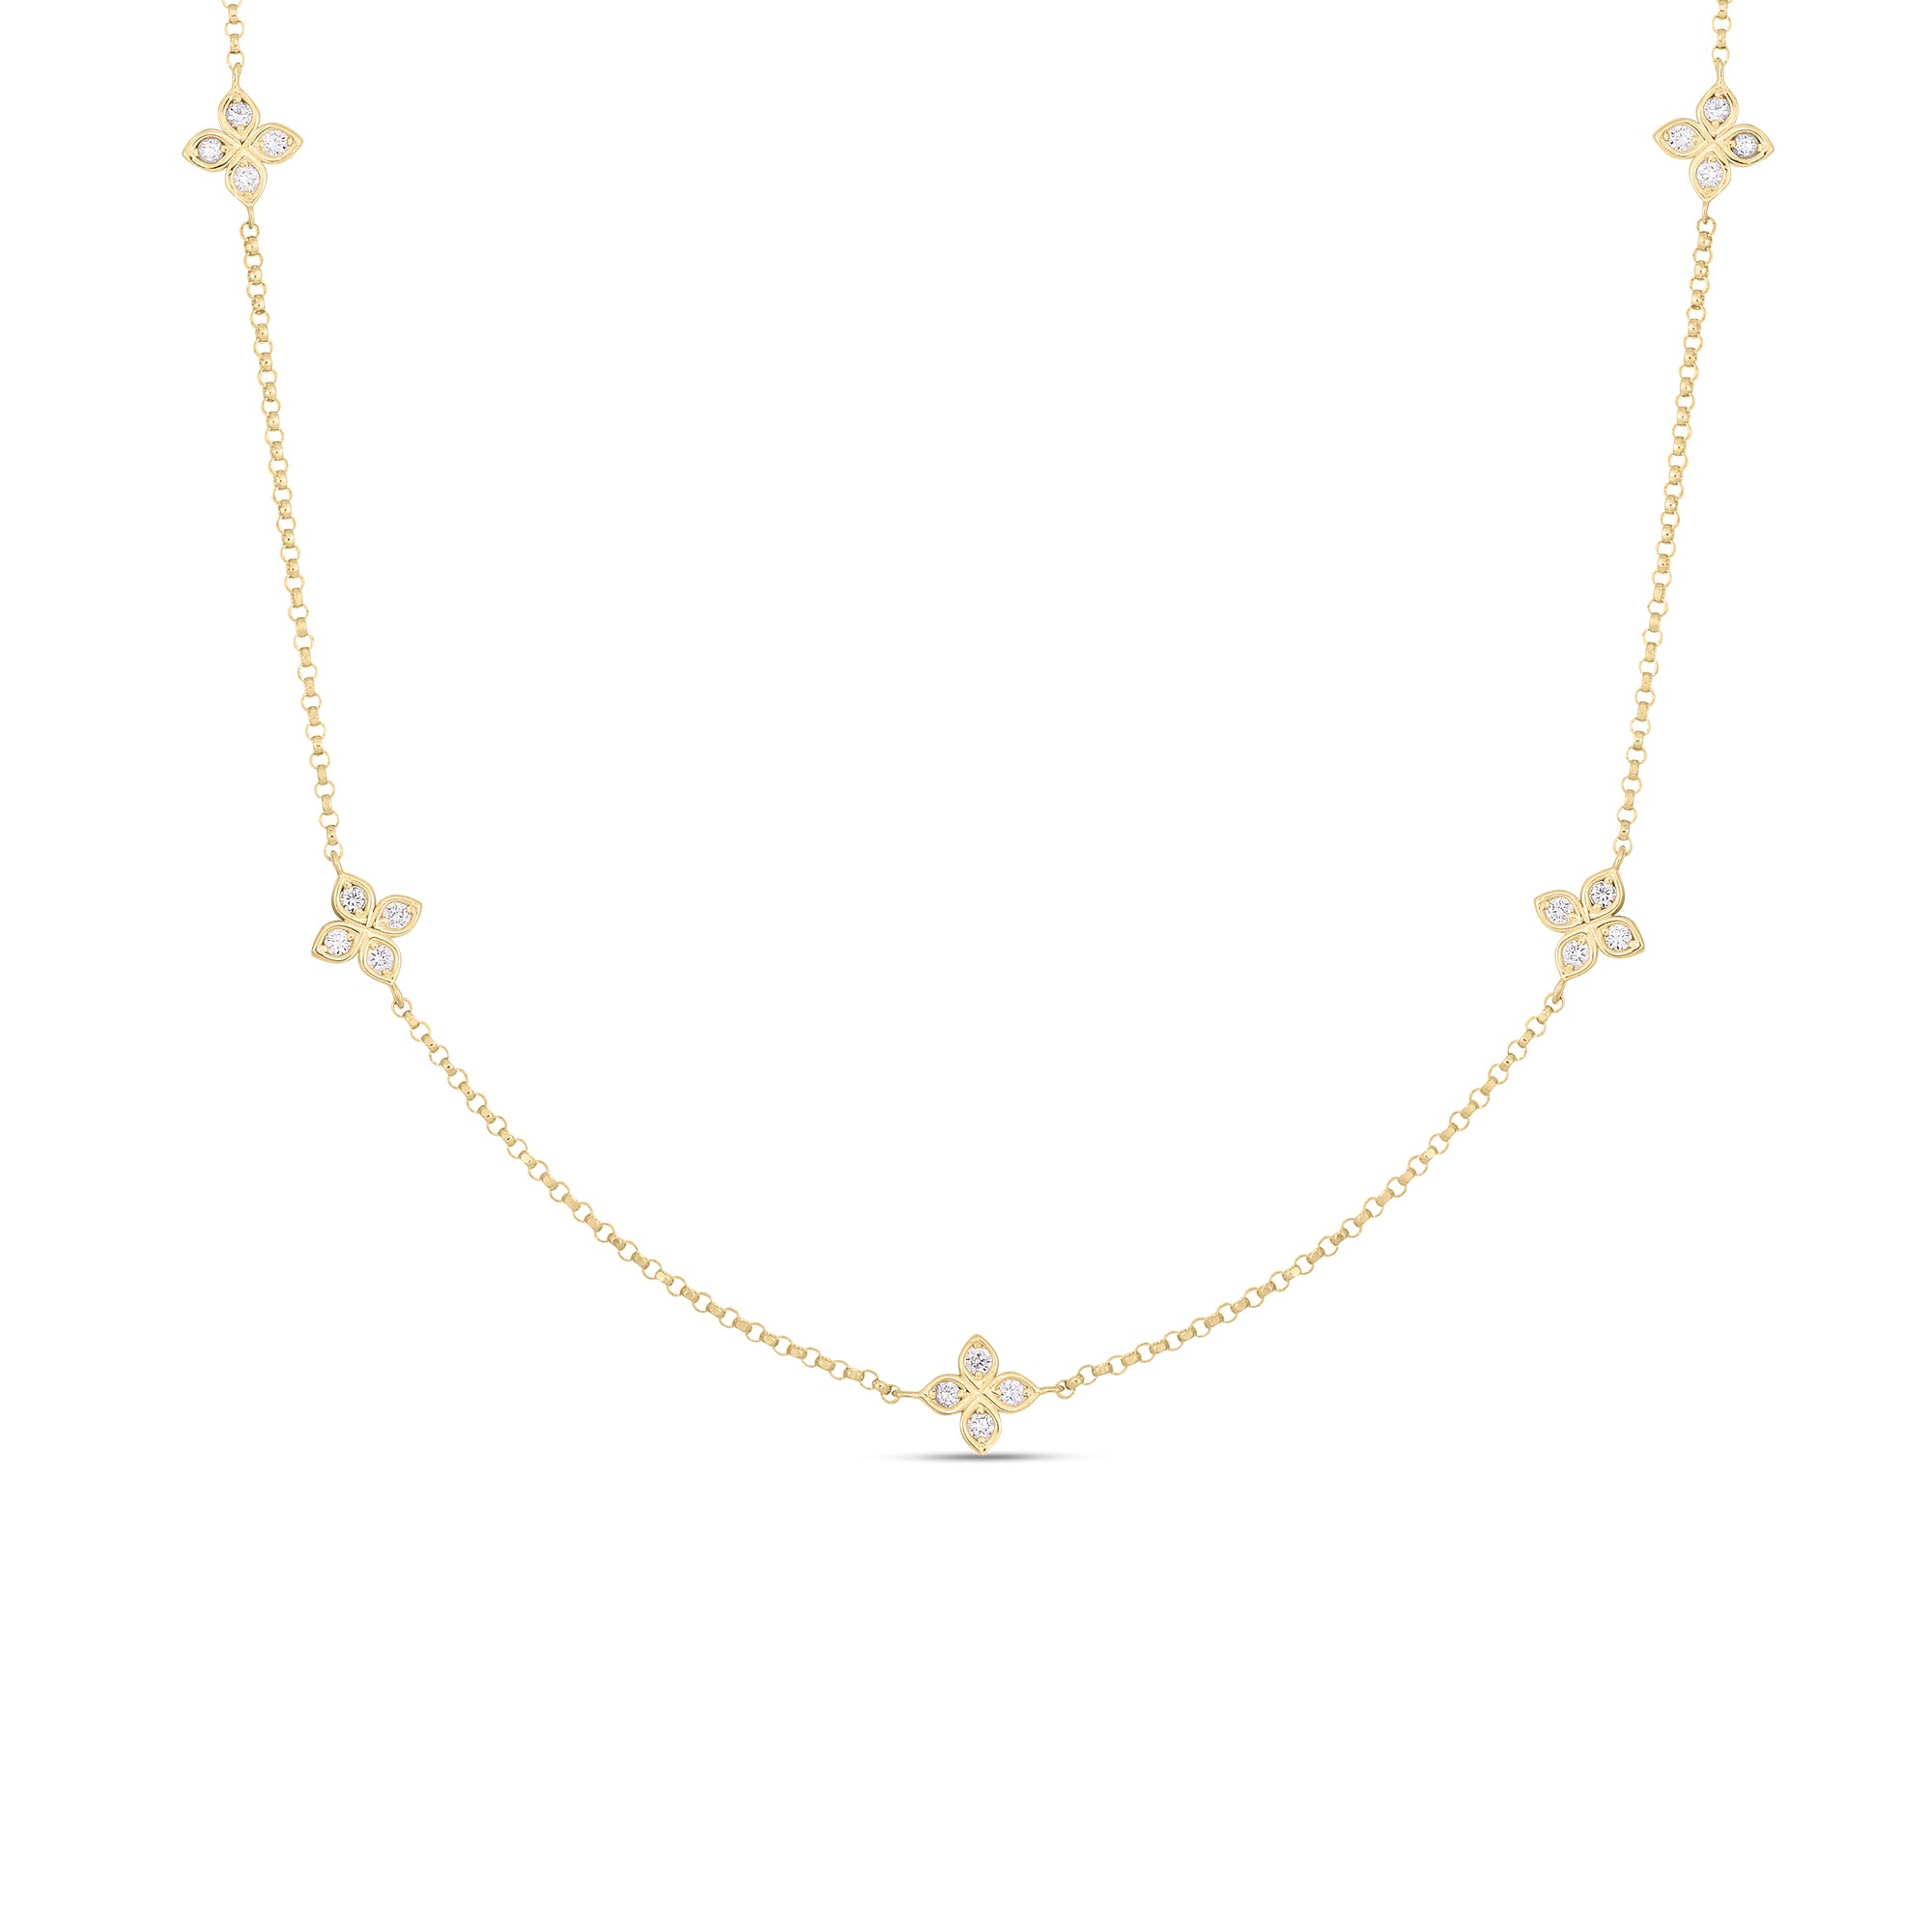 18K YELLOW GOLD LOVE BY THE INCH 5 STATION FLOWER NECKLACE